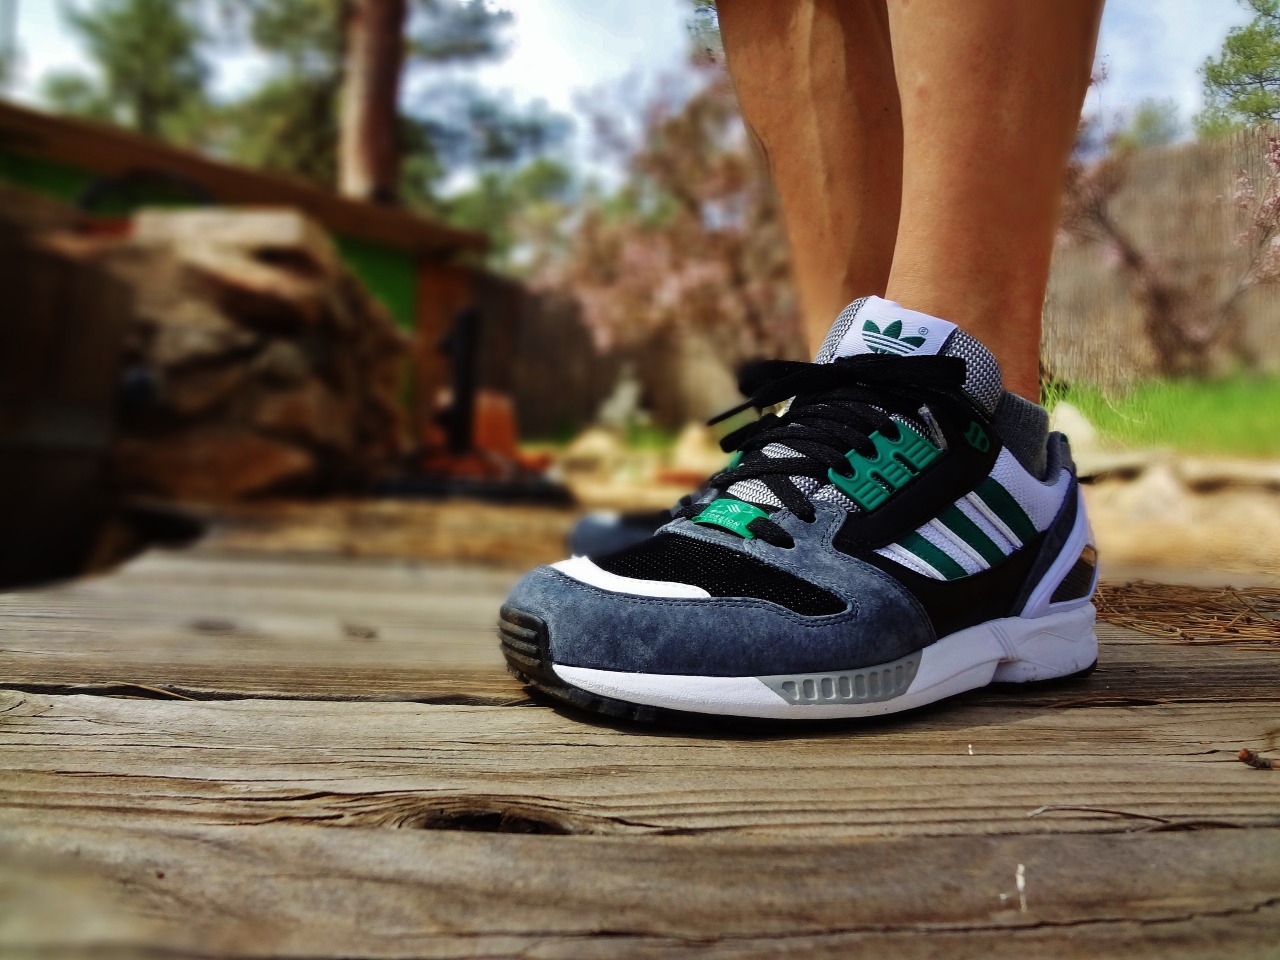 mita sneakers x Adidas ZX 8000 'EQT' (by – Sweetsoles 